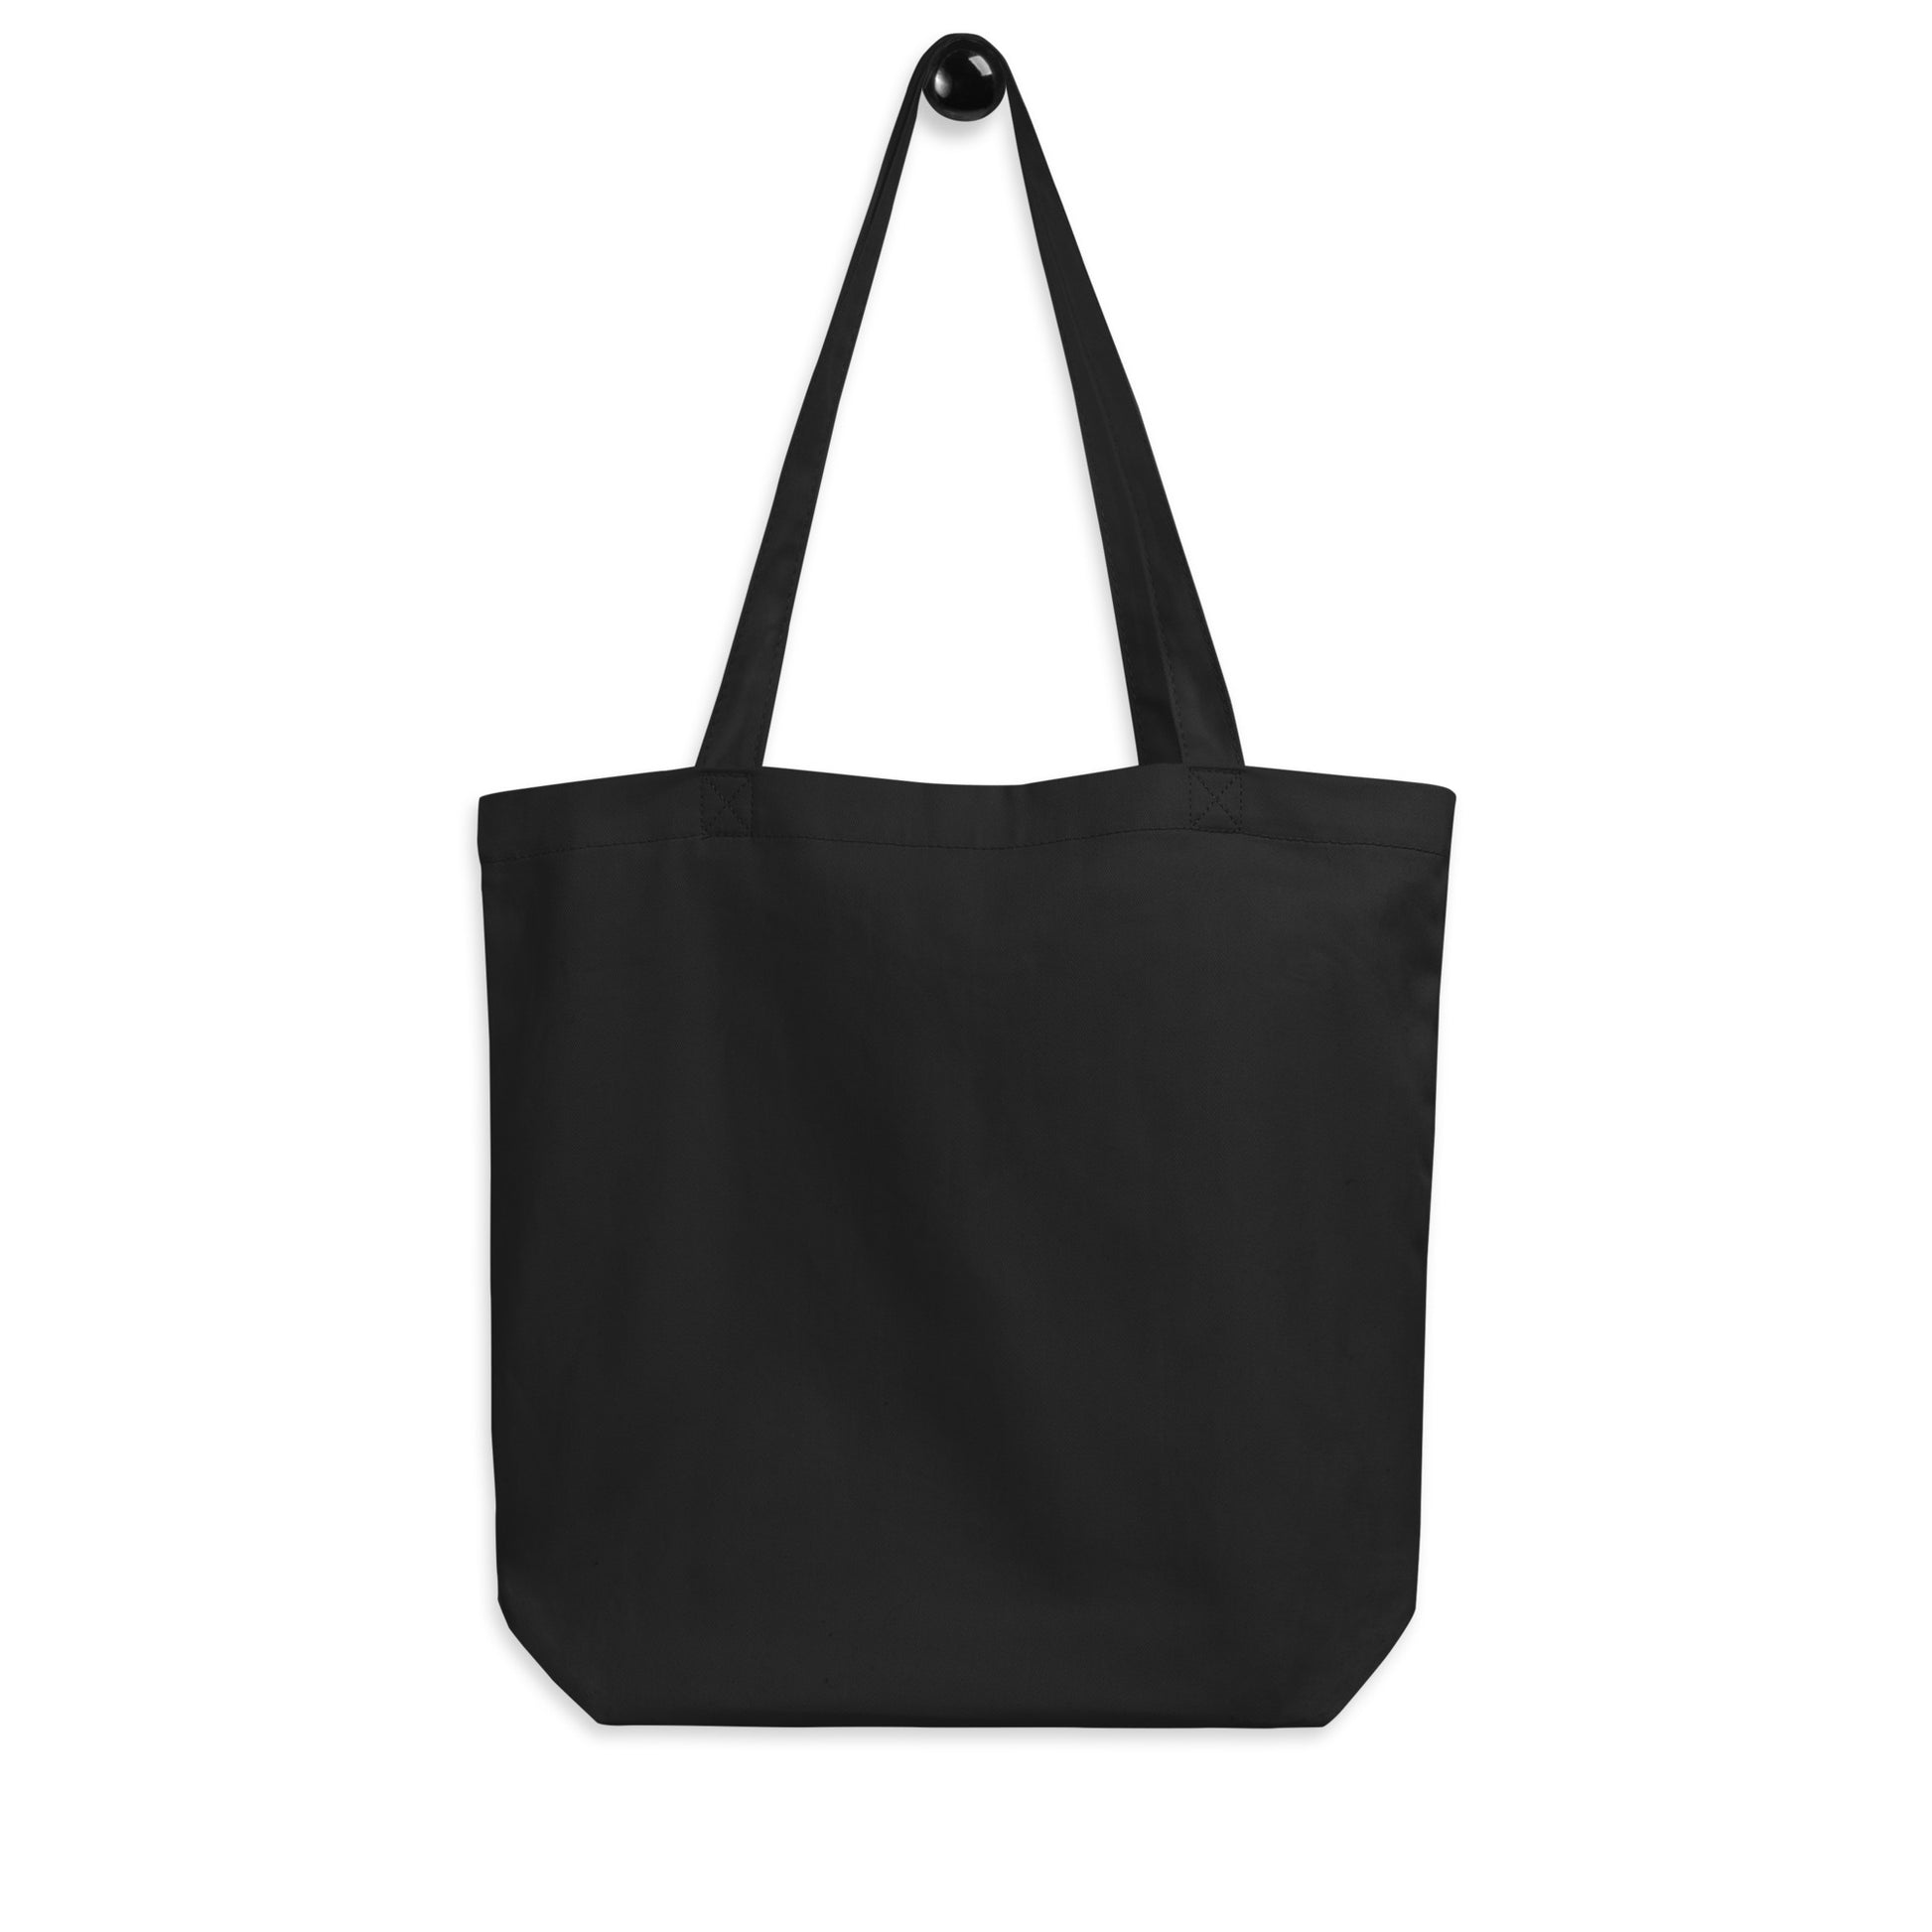 Unique Travel Gift Organic Tote - White Oval • FLL Fort Lauderdale • YHM Designs - Image 05